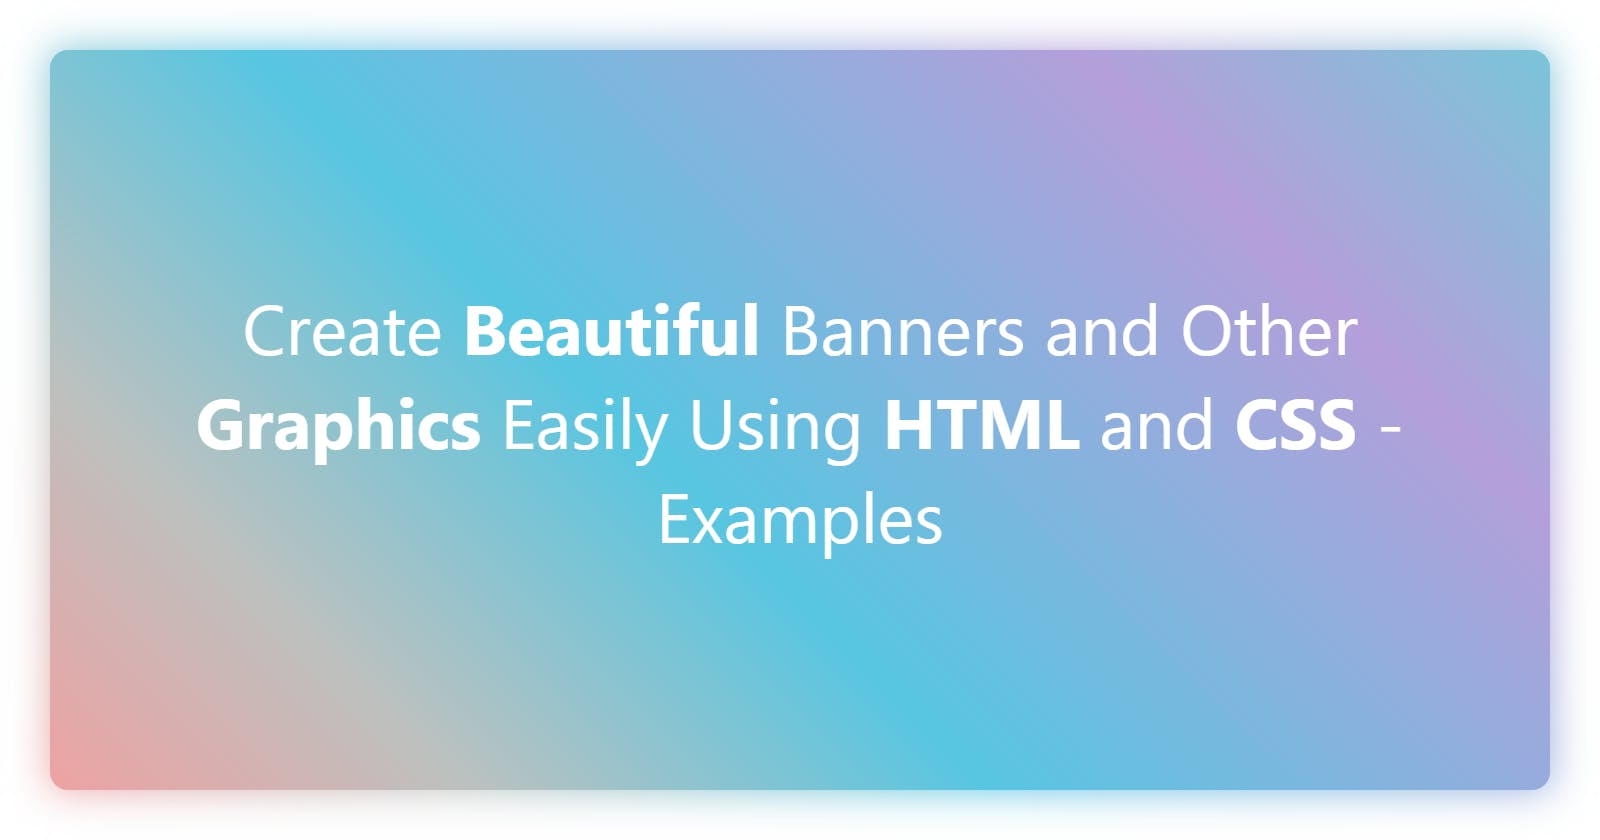 Create Beautiful Banners and Other Graphics Easily Using HTML and CSS - Examples